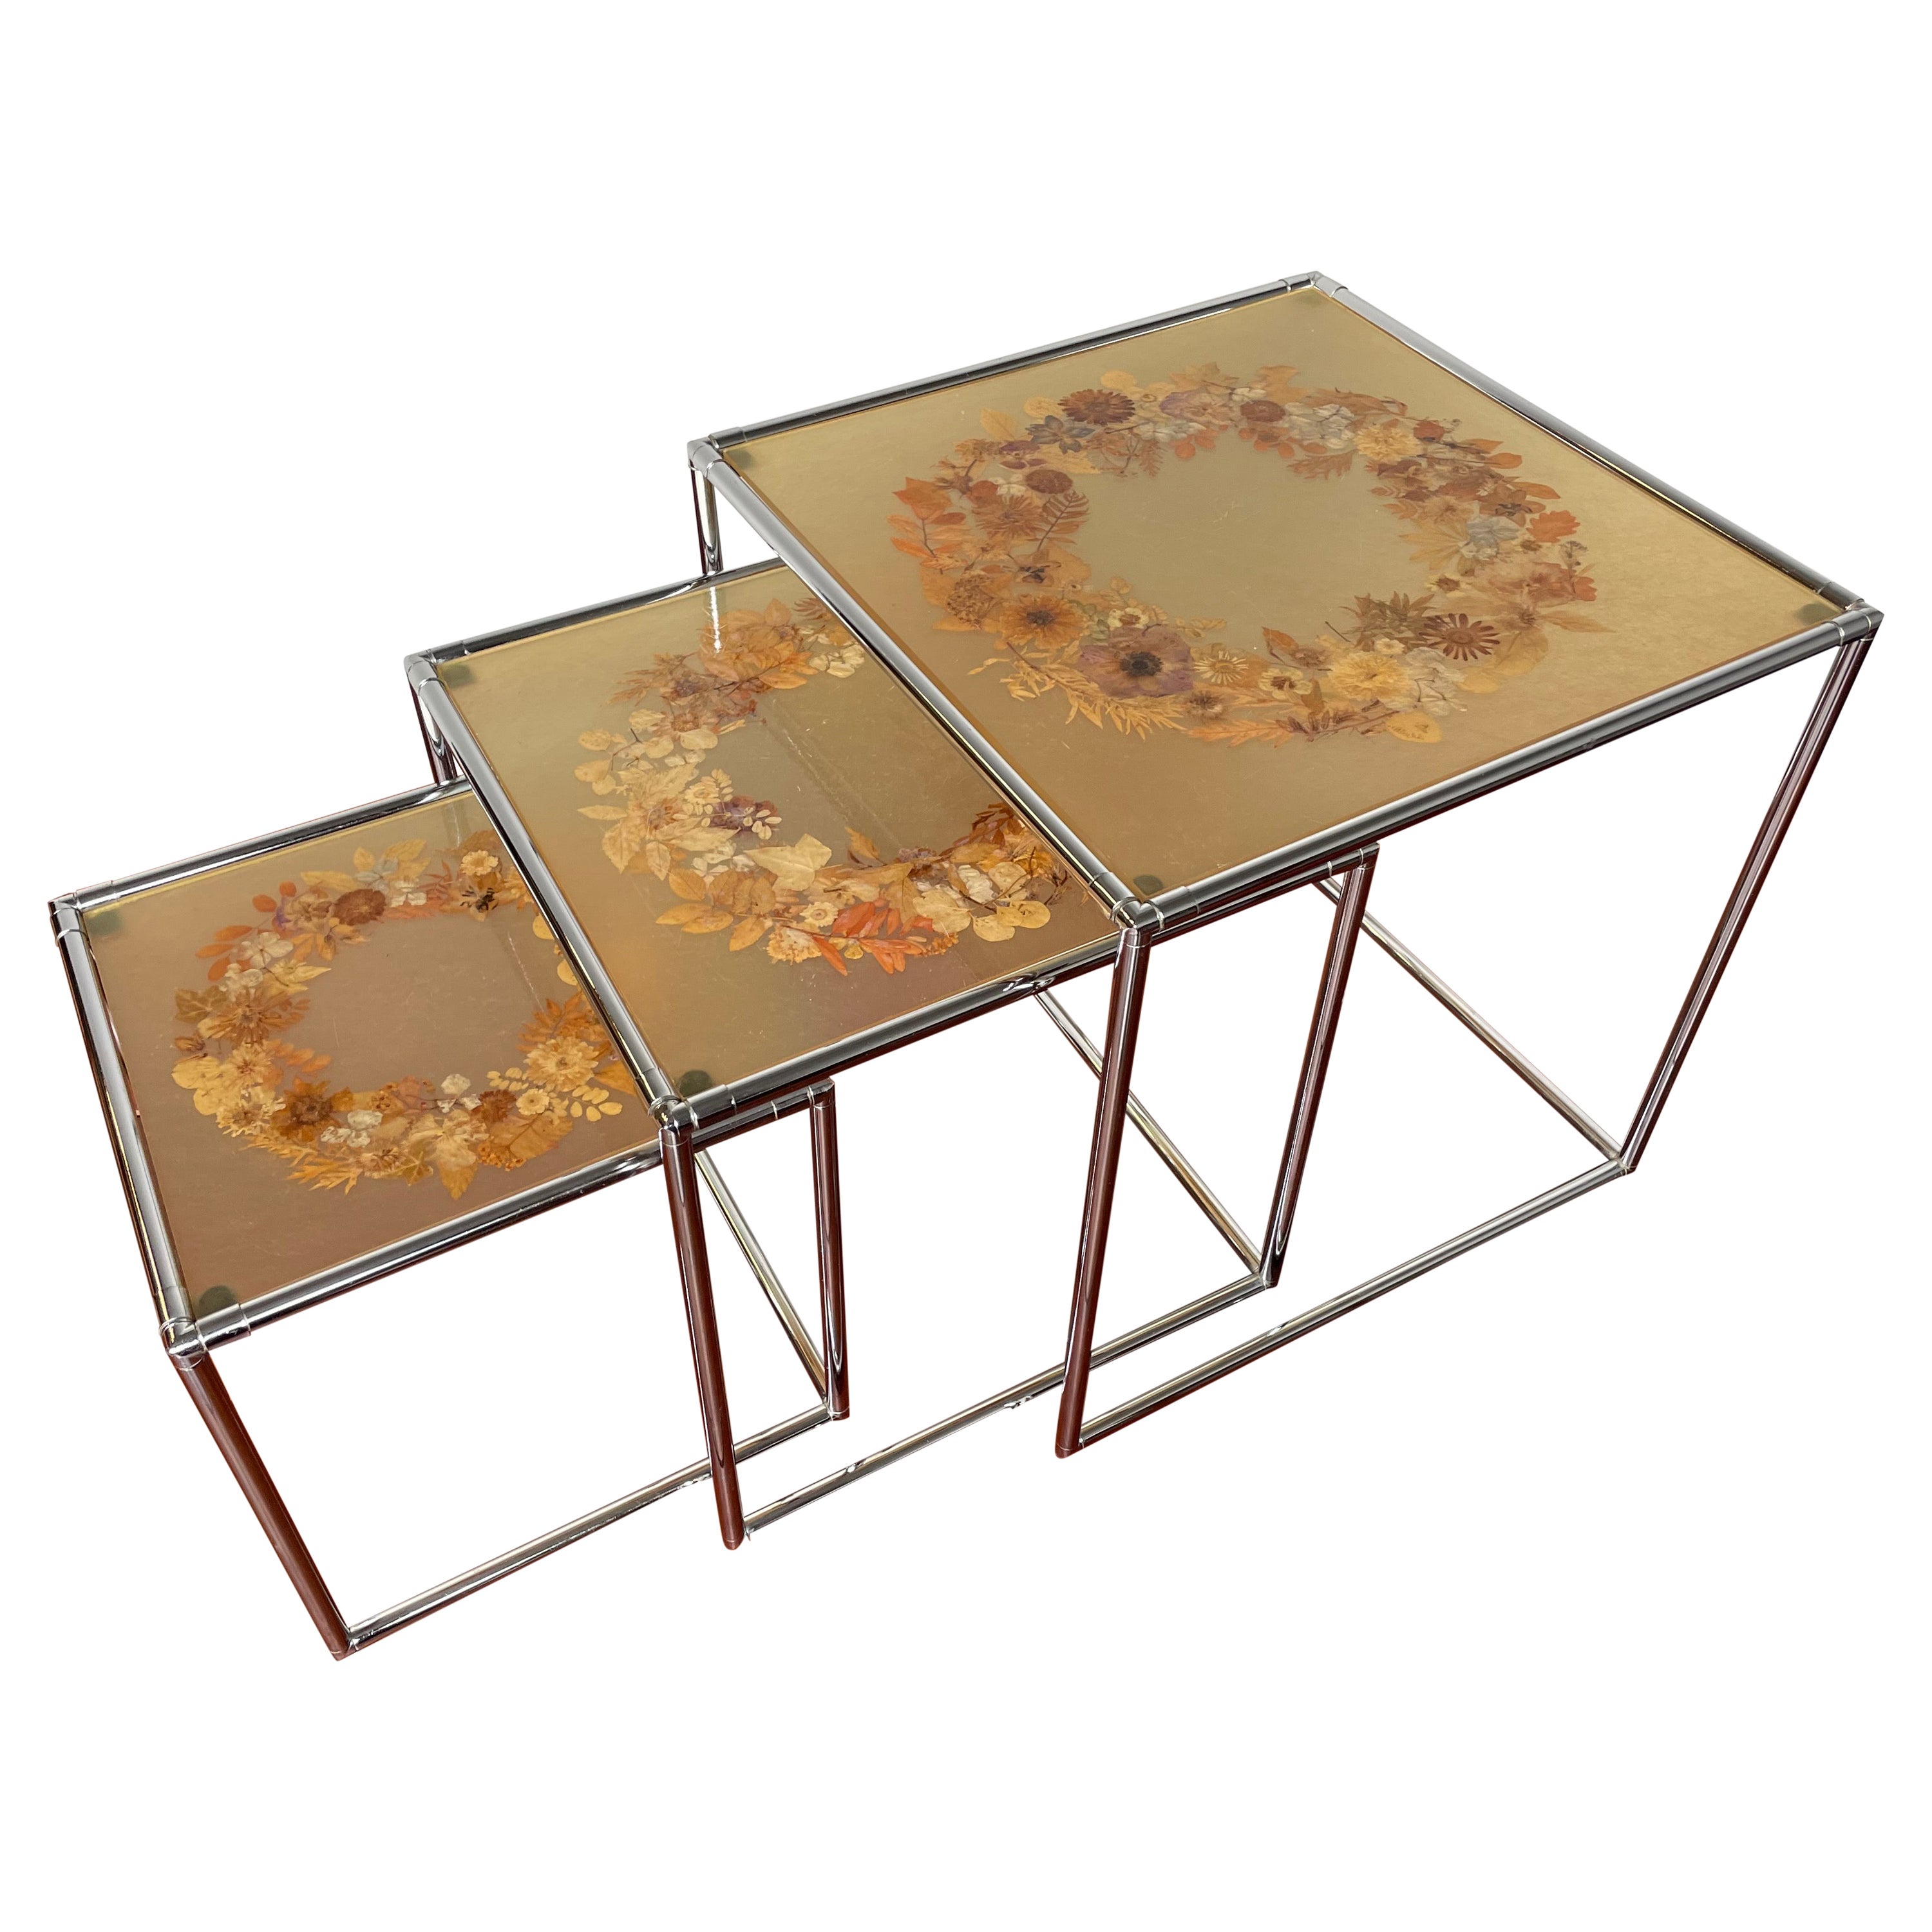 Rare Mid-Century Modern, French Set of Chrome & Resin Inlaid Tables by Accolay